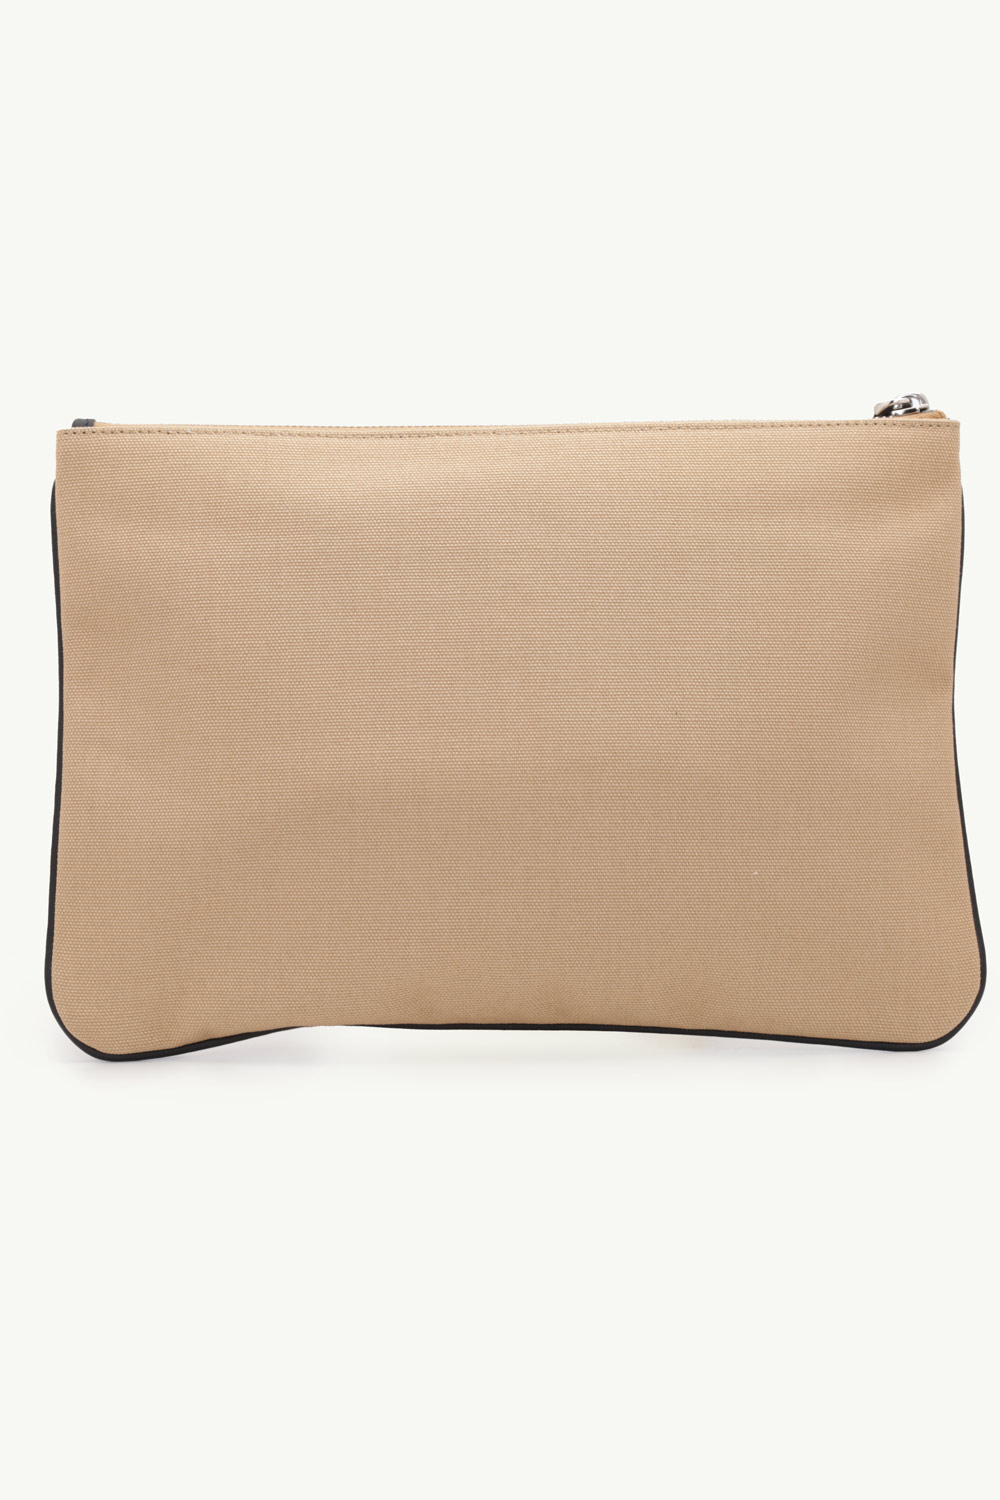 FENDI Medium Zipped Pouch in Beige Canvas with Embroidered FENDI ROMA Logo 1